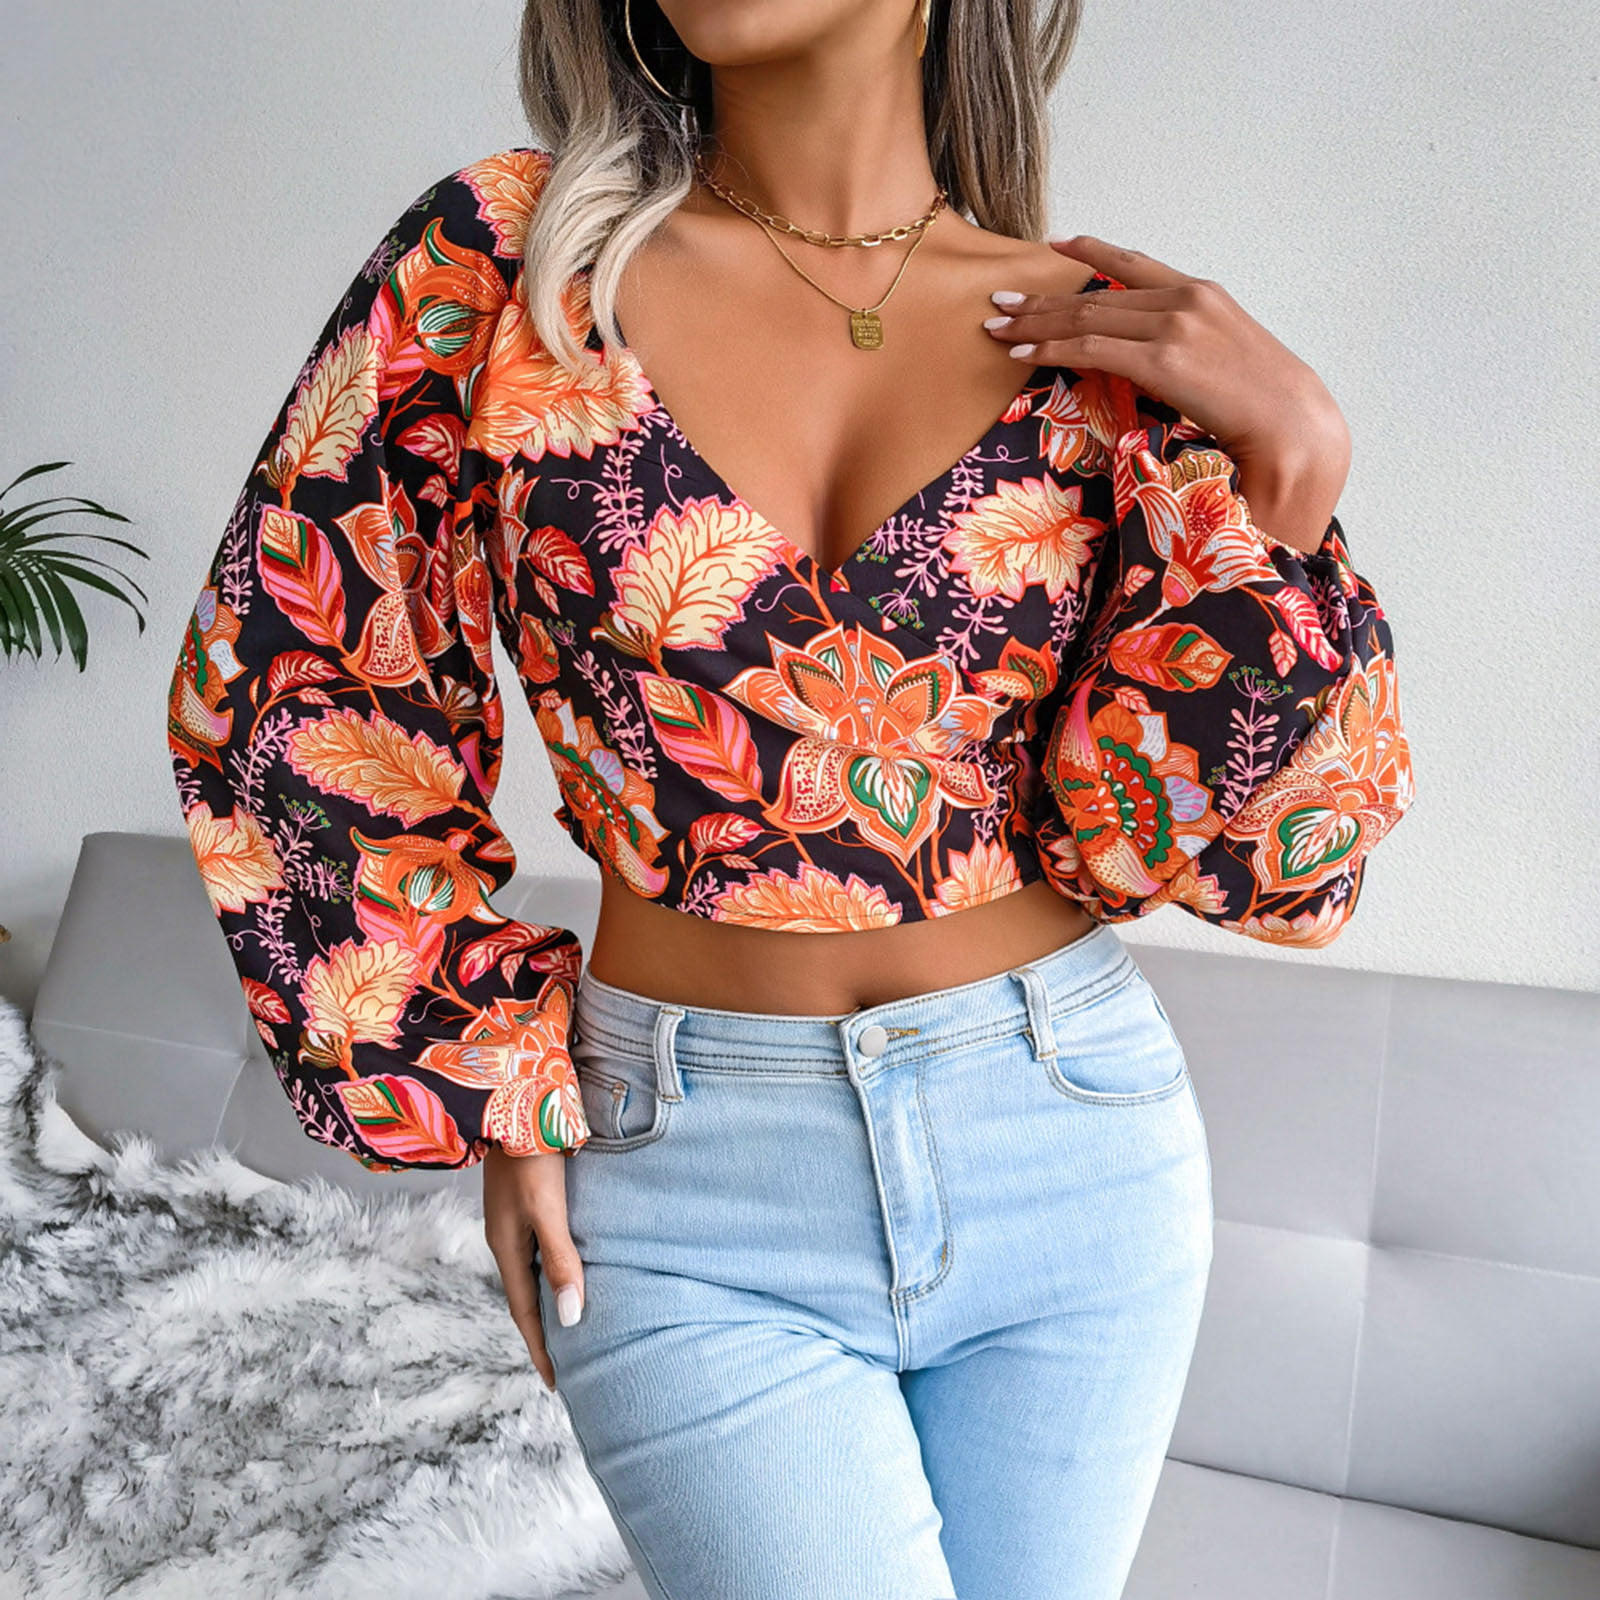 Baycosin Chiffon Tops for Women Resort Style Long Puff Sleeve T Shirt  V-Neck Floral Crop Top